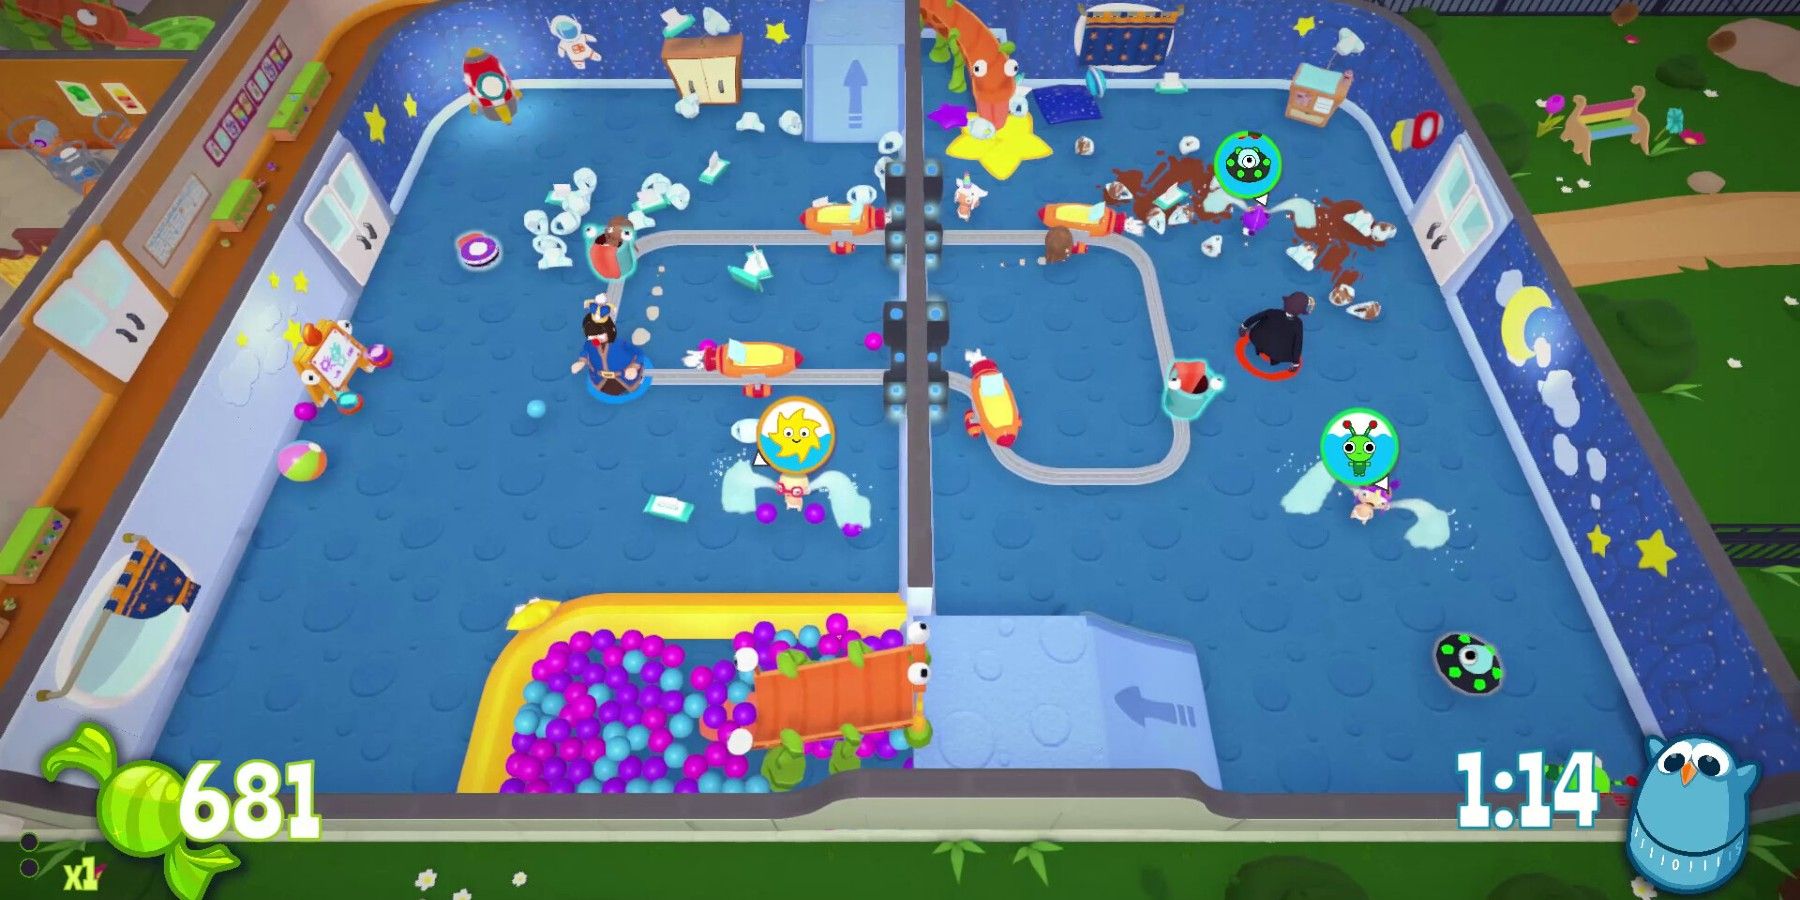 Baby Storm game chaotic scene in nursery with ballpit